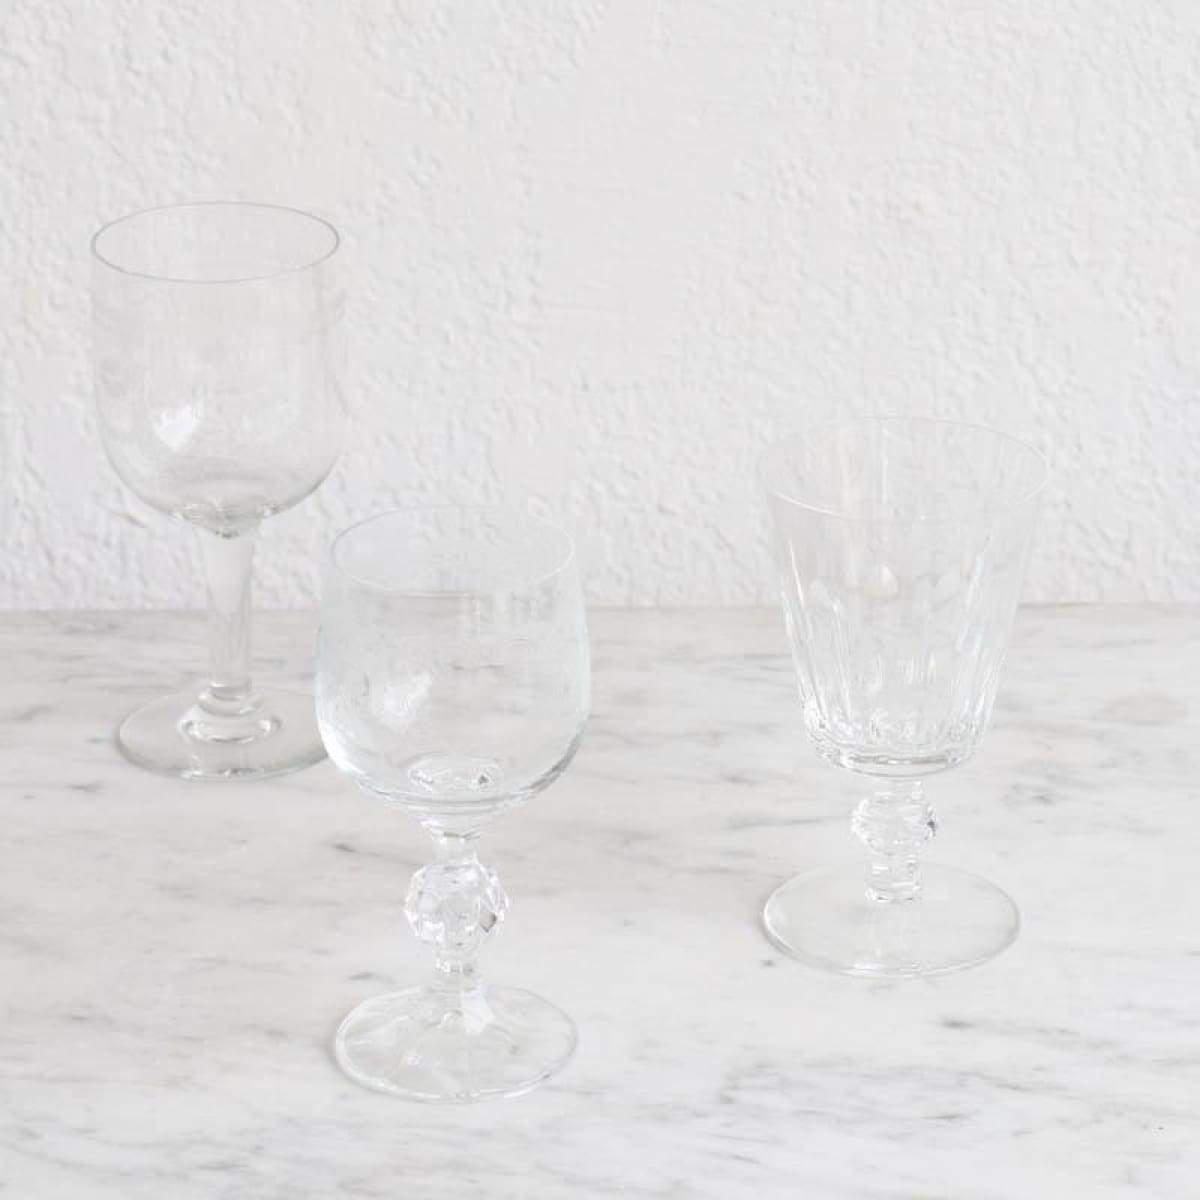 Set of 2 Small Square Wine Glasses Grey Bowl / Clear Stem